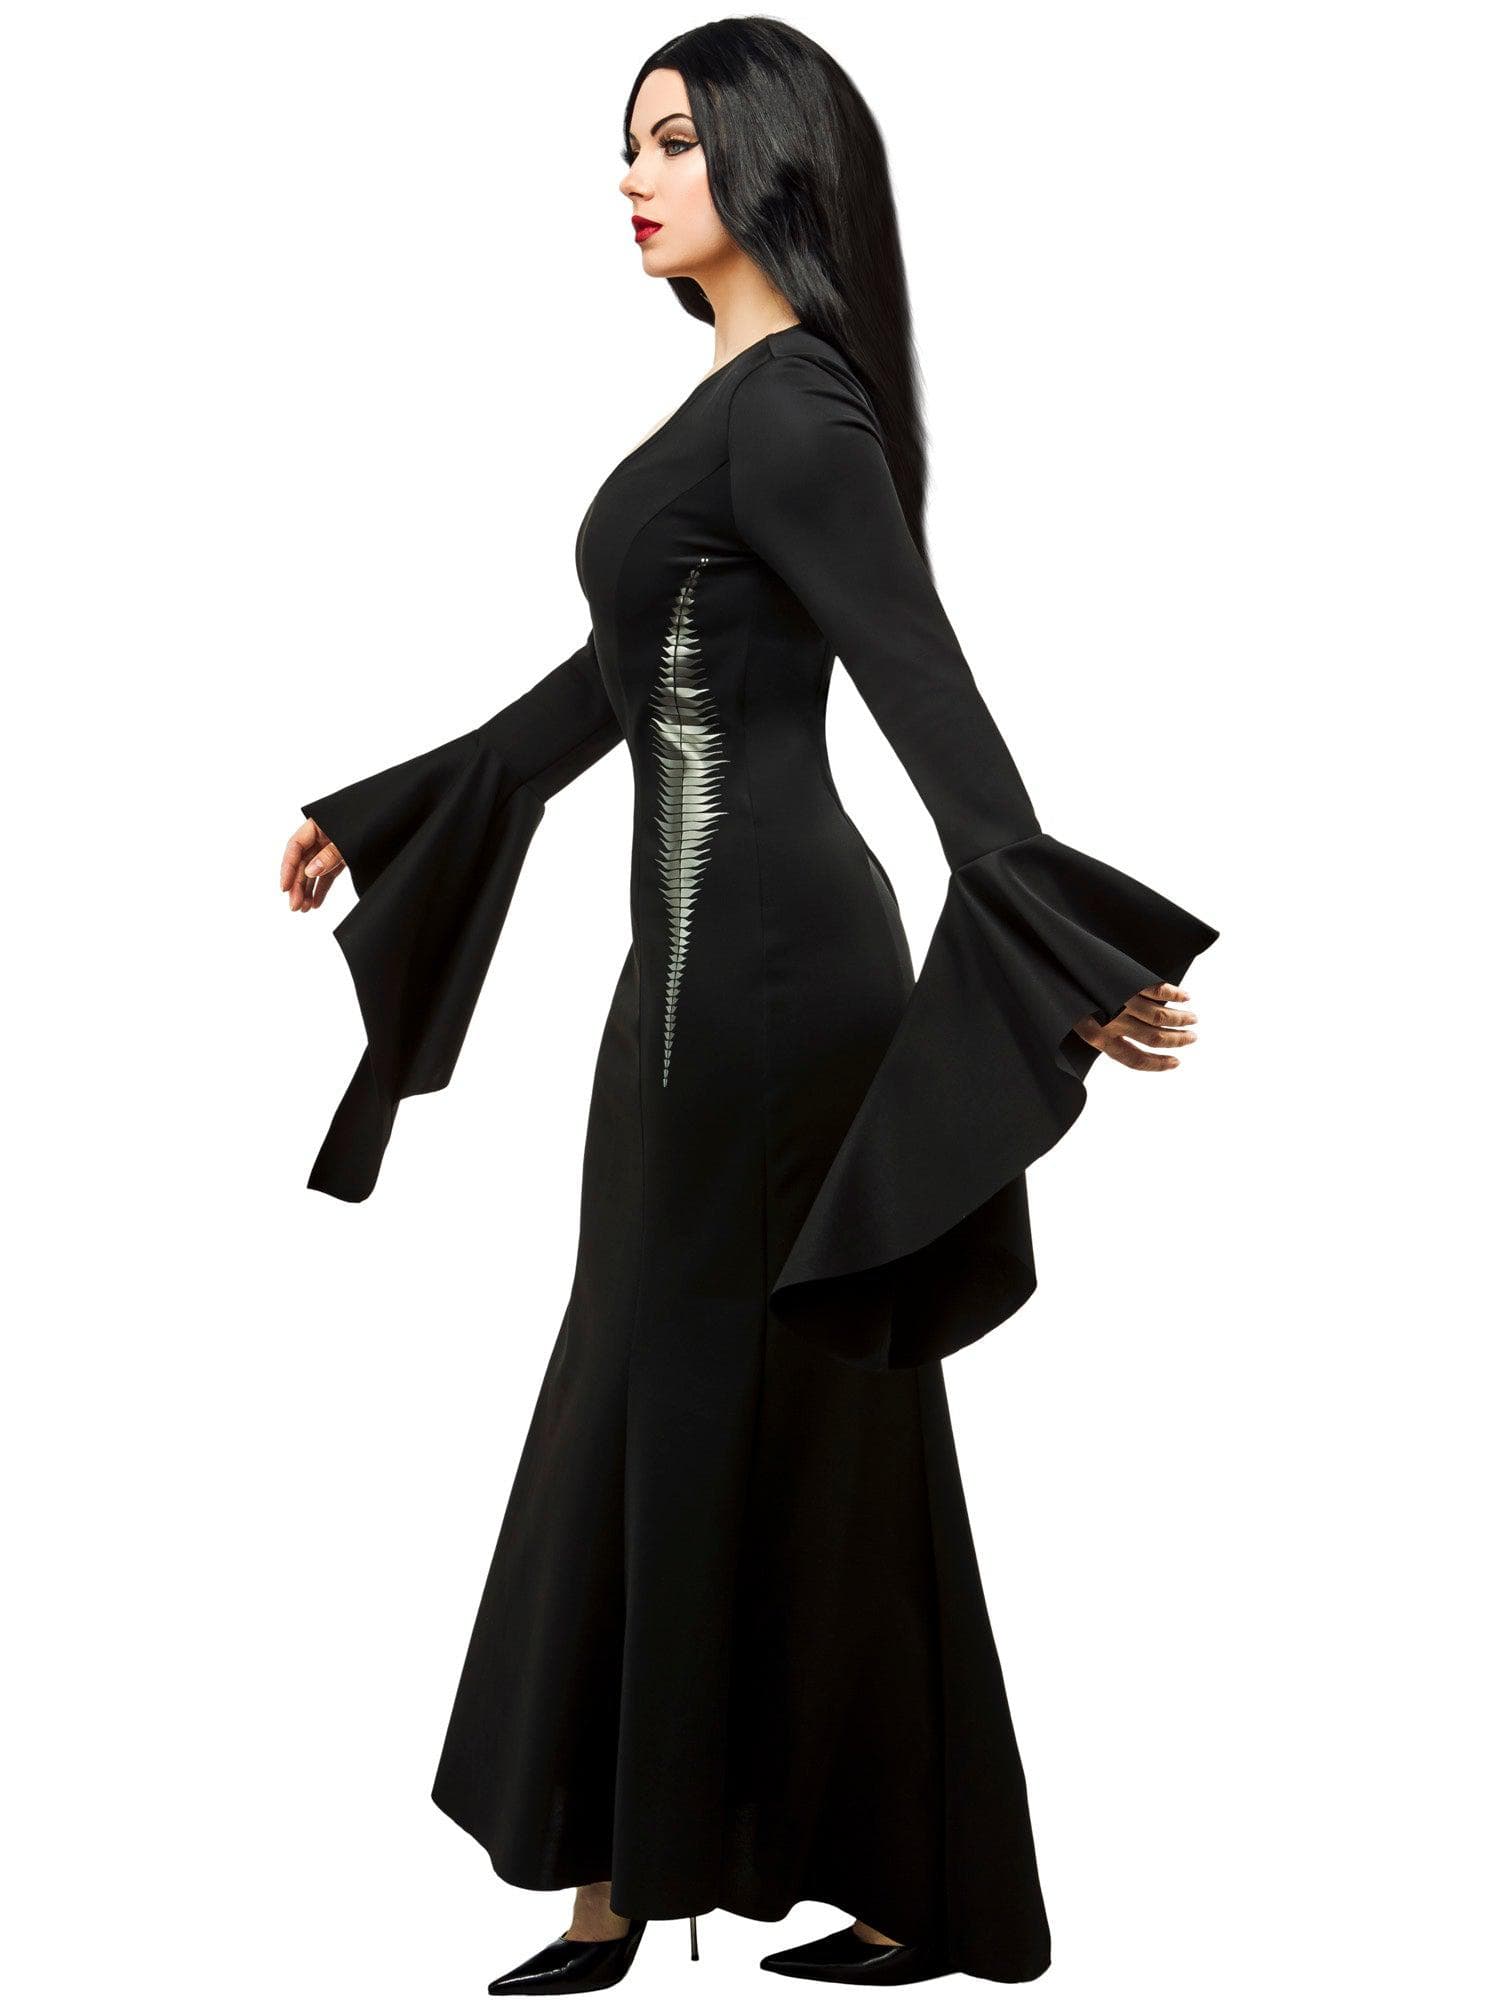 Wednesday Nevermore Academy Morticia Addams Adult Costume - costumes.com